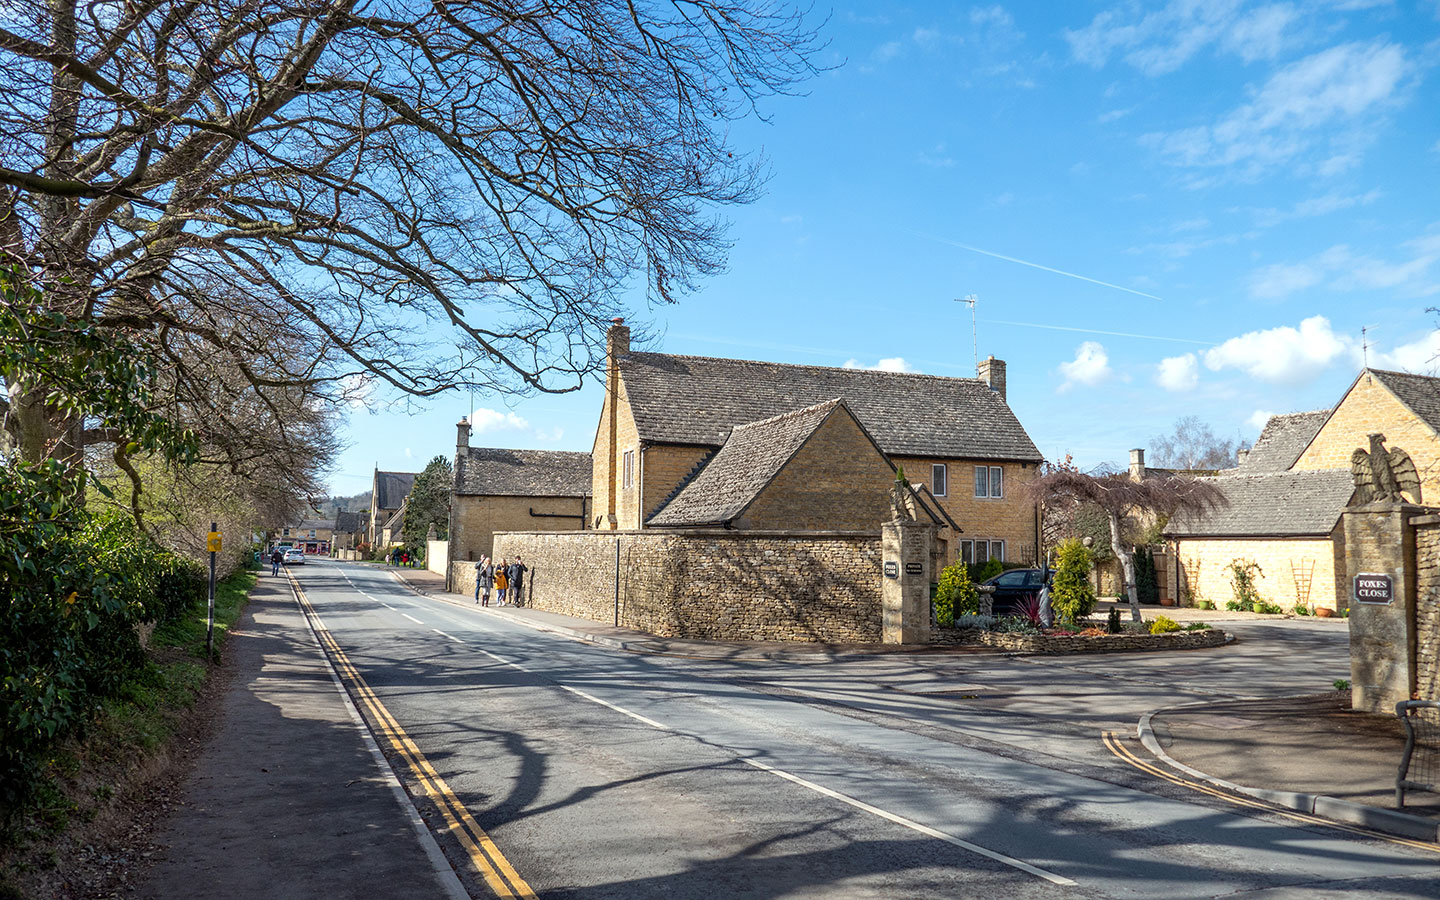 Station Road in Bourton-on-the-Water